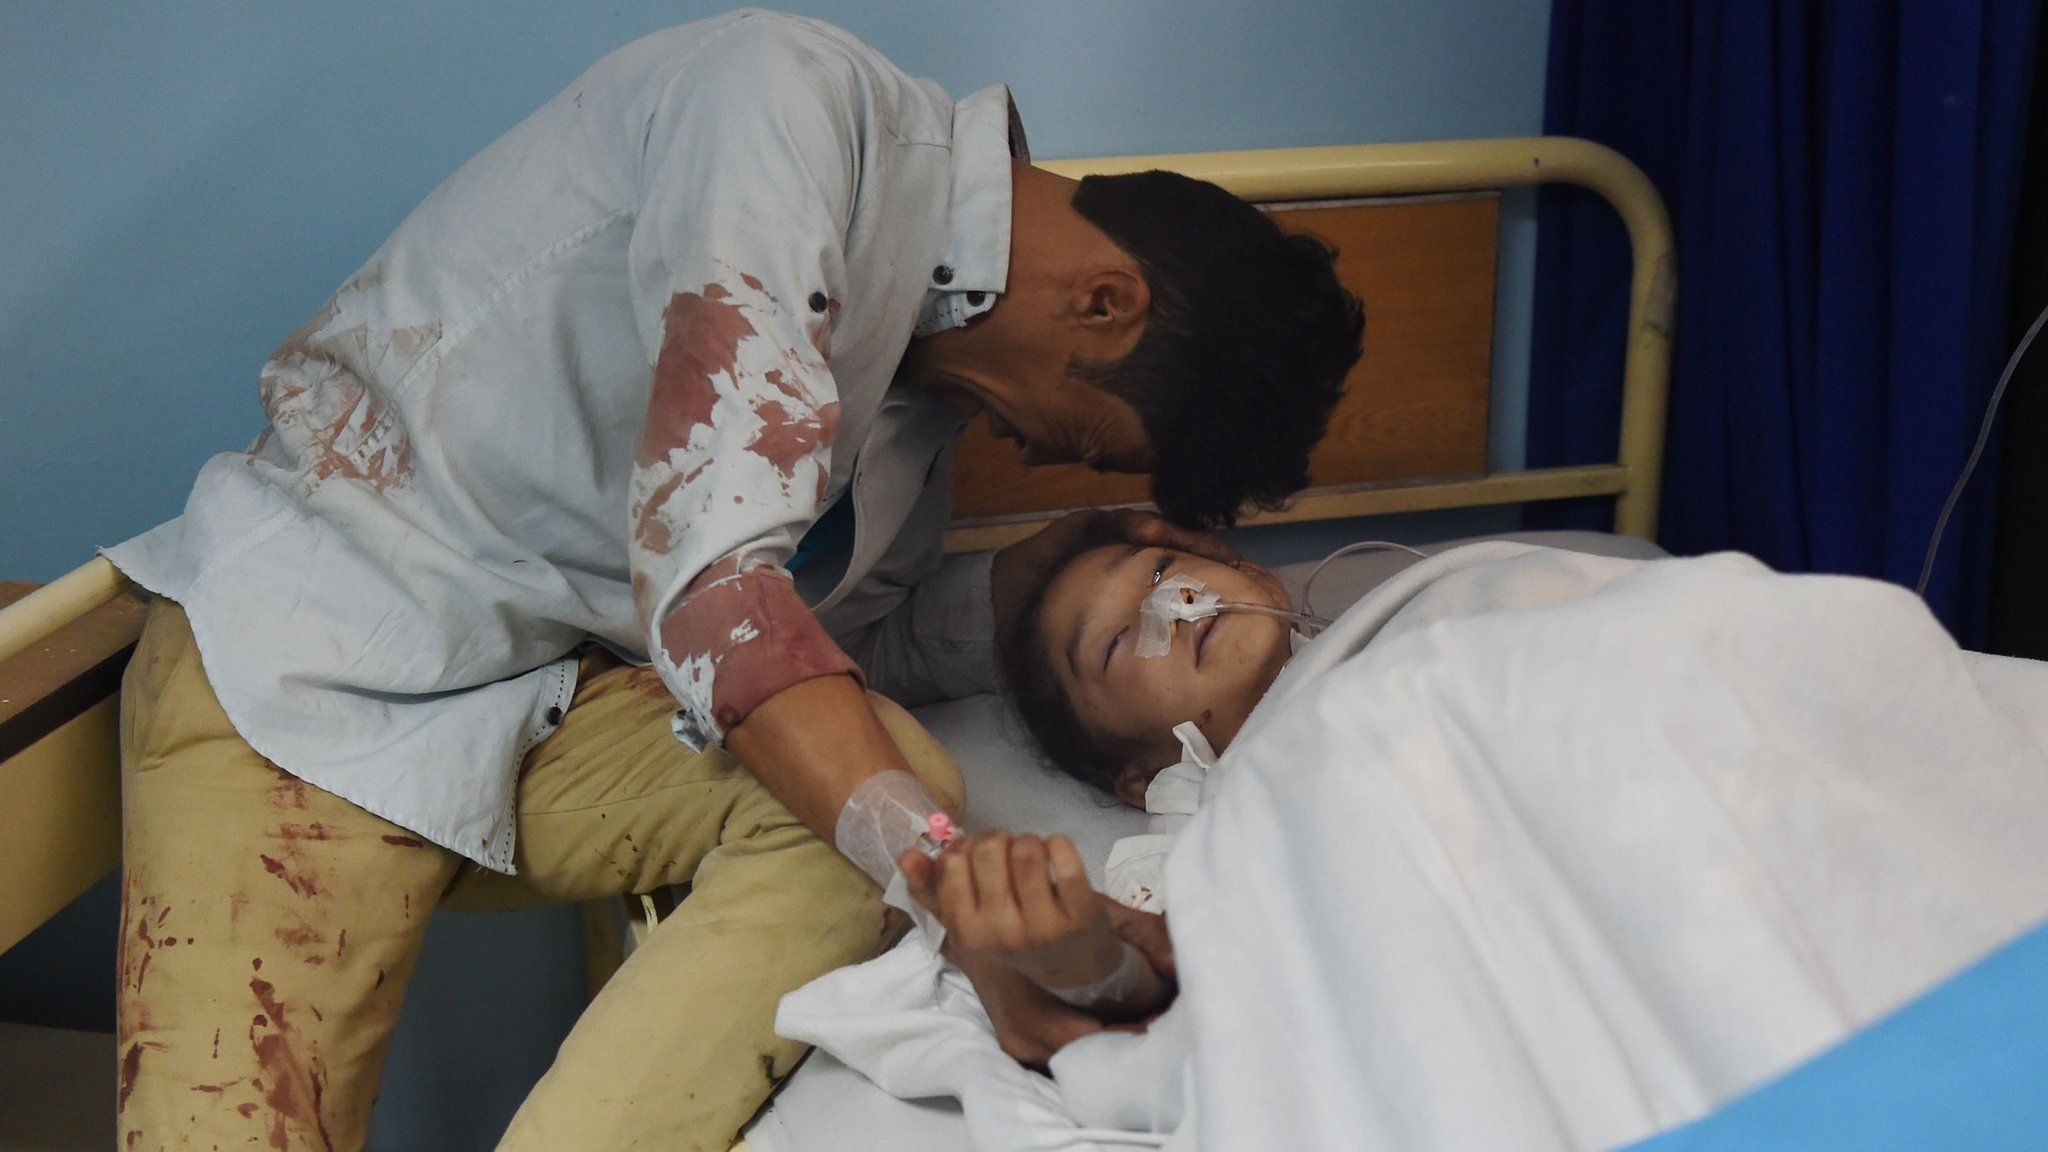 Wounded Afghan child Zahra, 8, is treated following a suicide bombing attack at the Isteqlal Hospital in Kabul on April 22, 2018